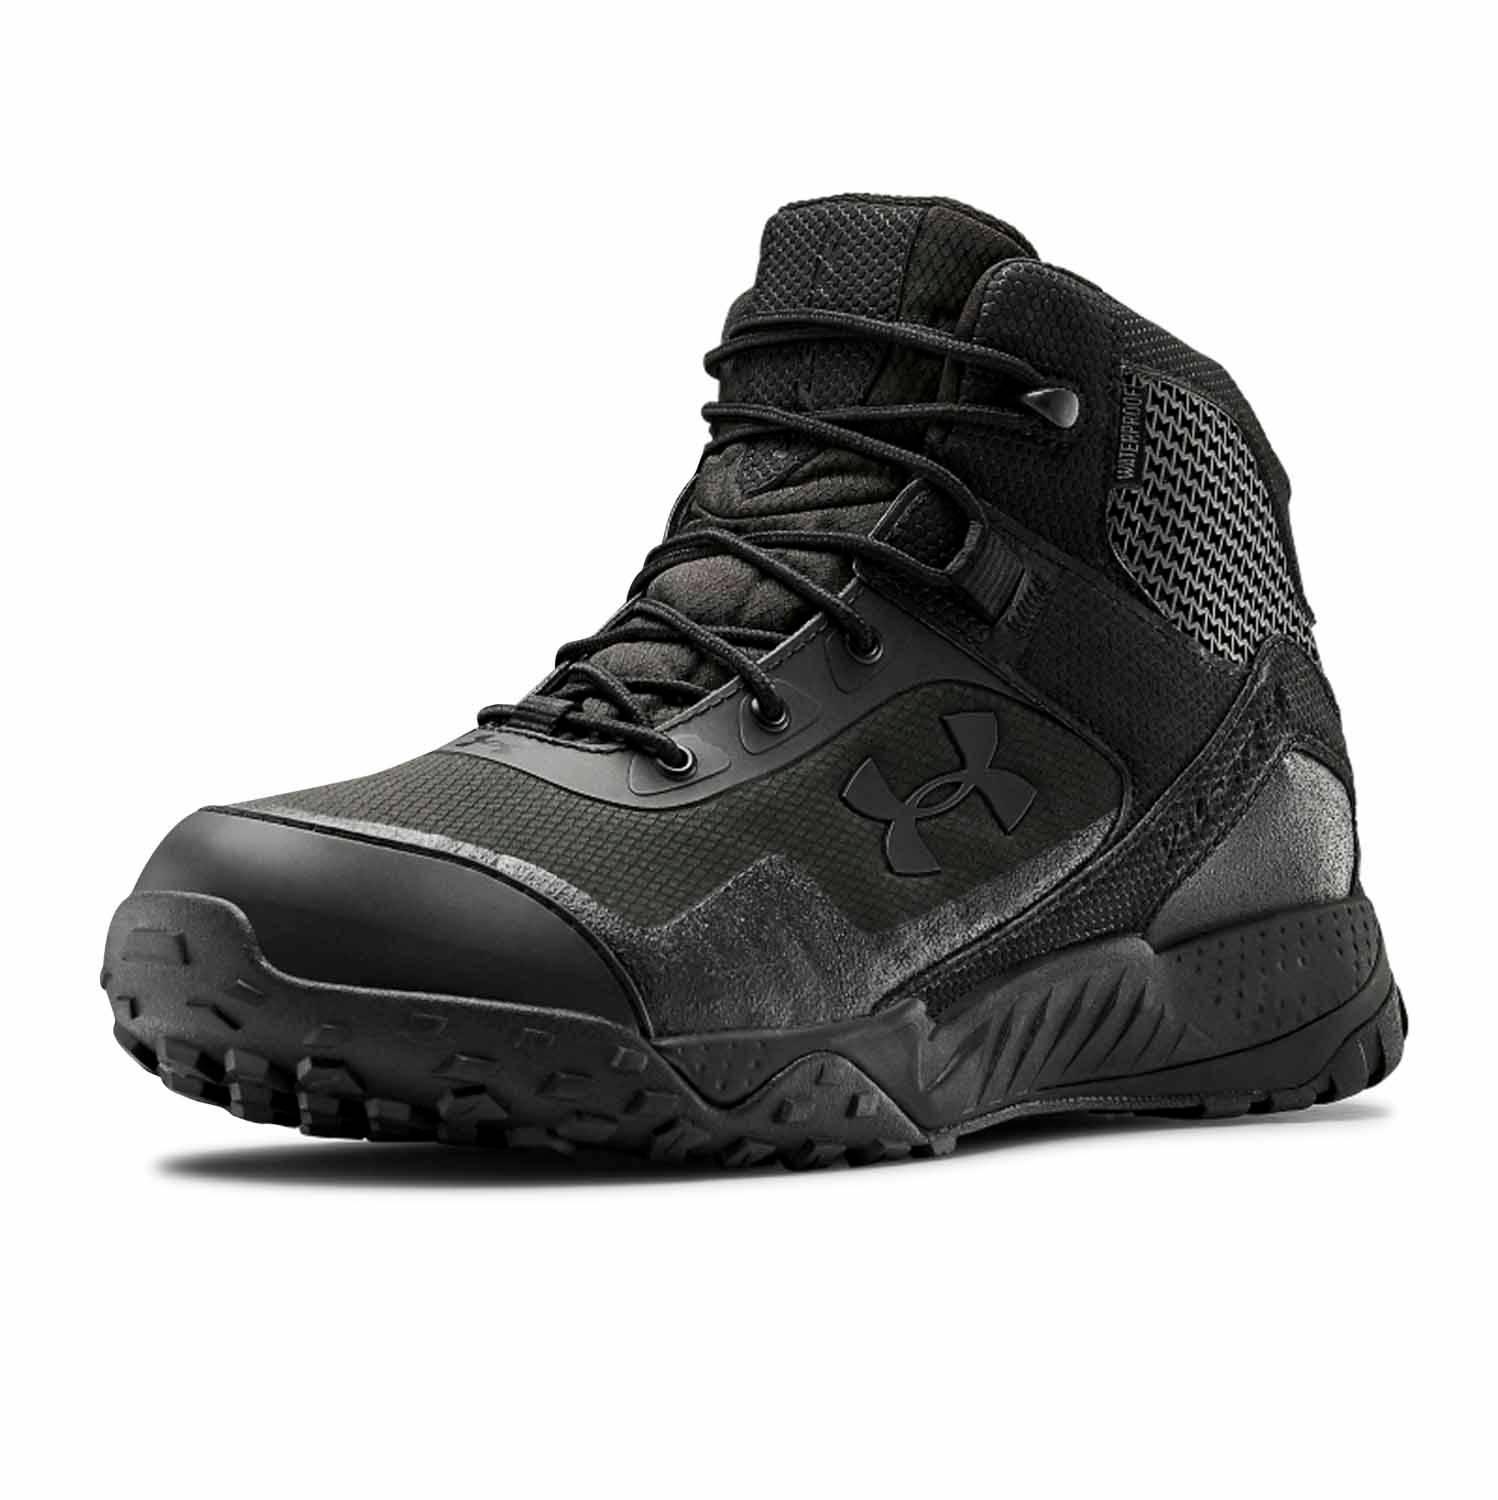 waterproof boots under armour